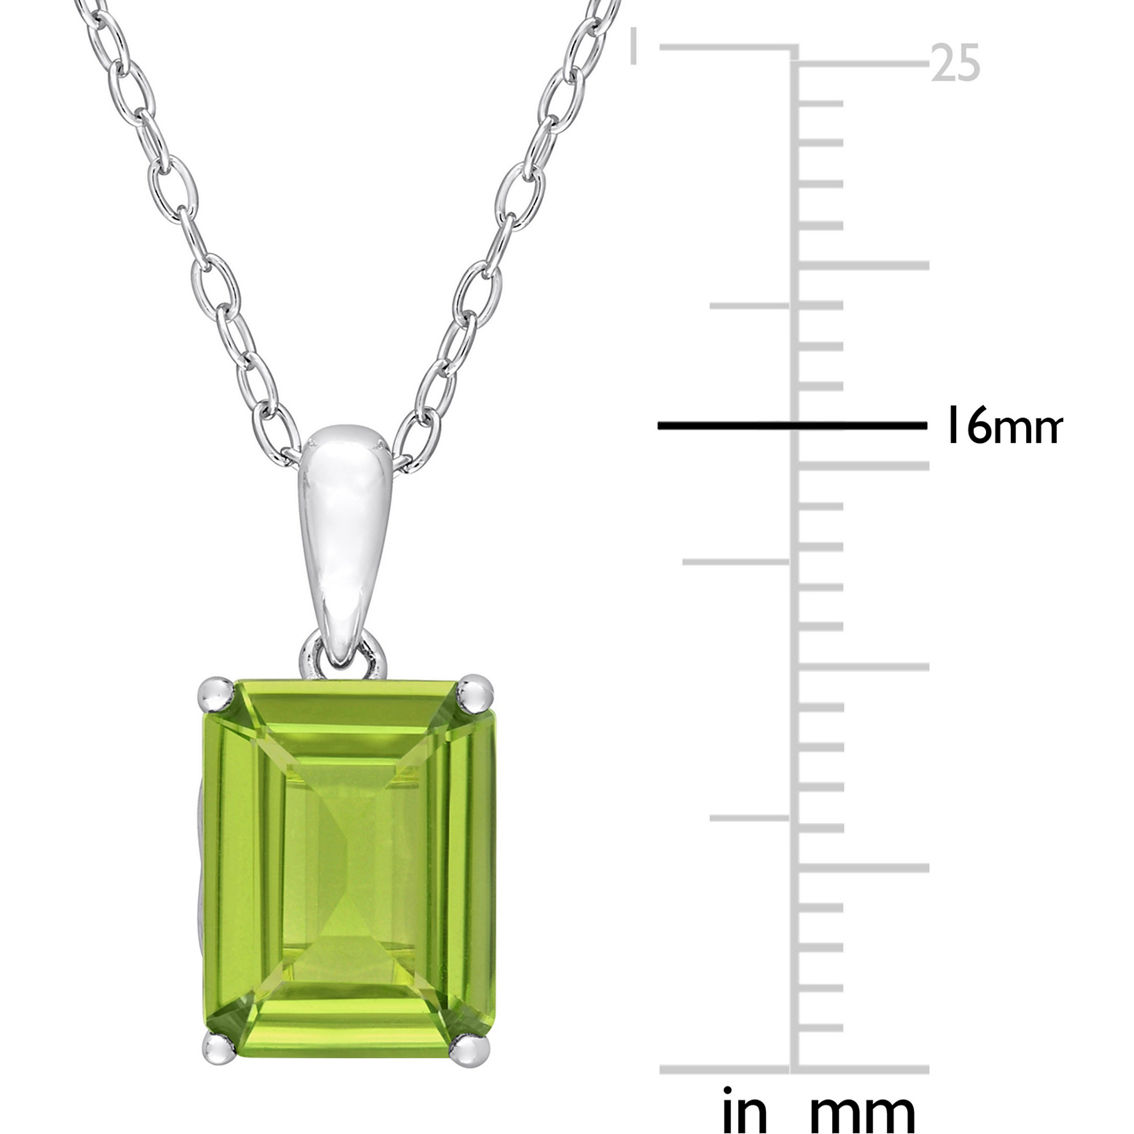 Sofia B. 2pc Set Emerald-Cut Peridot Solitaire Necklace & Earrings Sterling Silver - Image 4 of 4